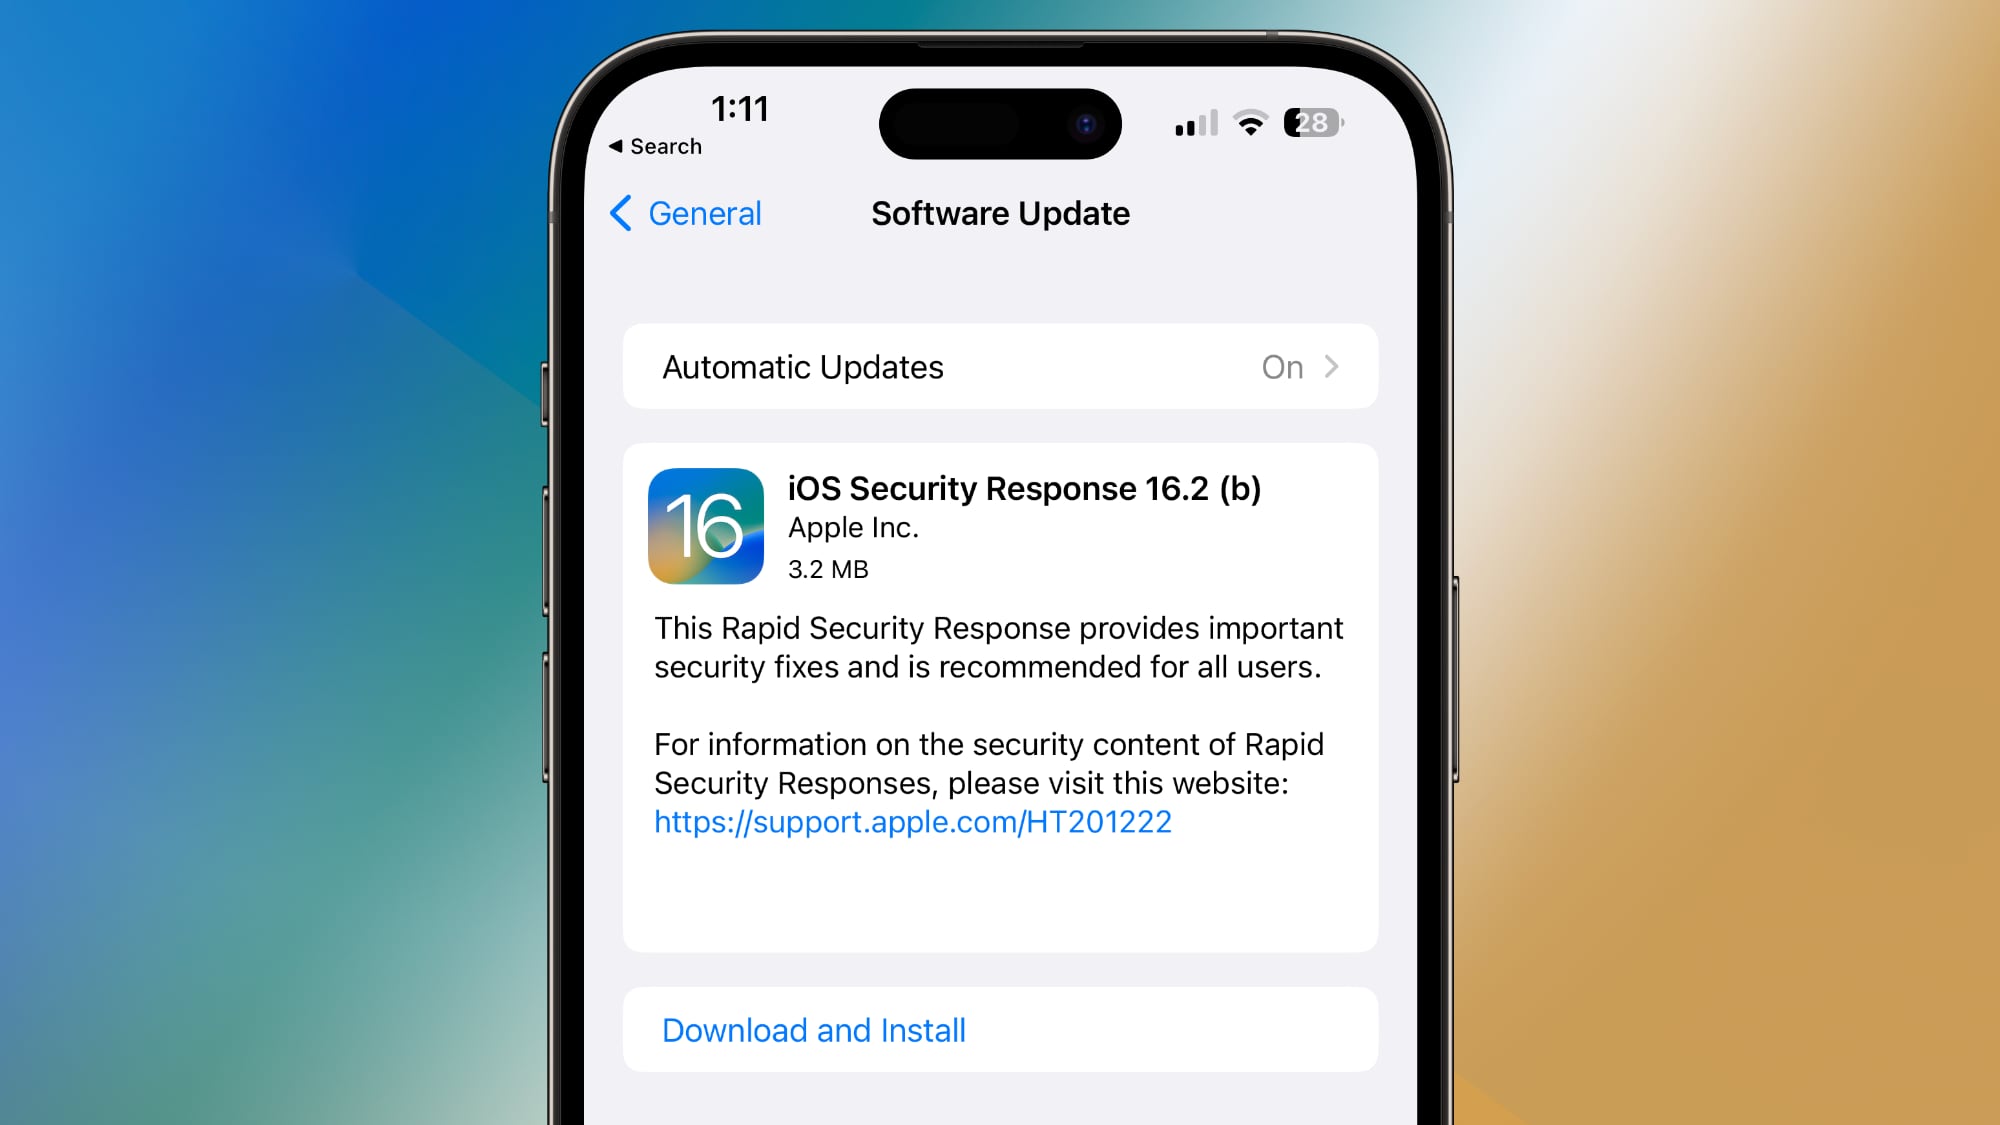 Apple Releases Another Rapid Security Response Update for iOS 16.2 Beta Users